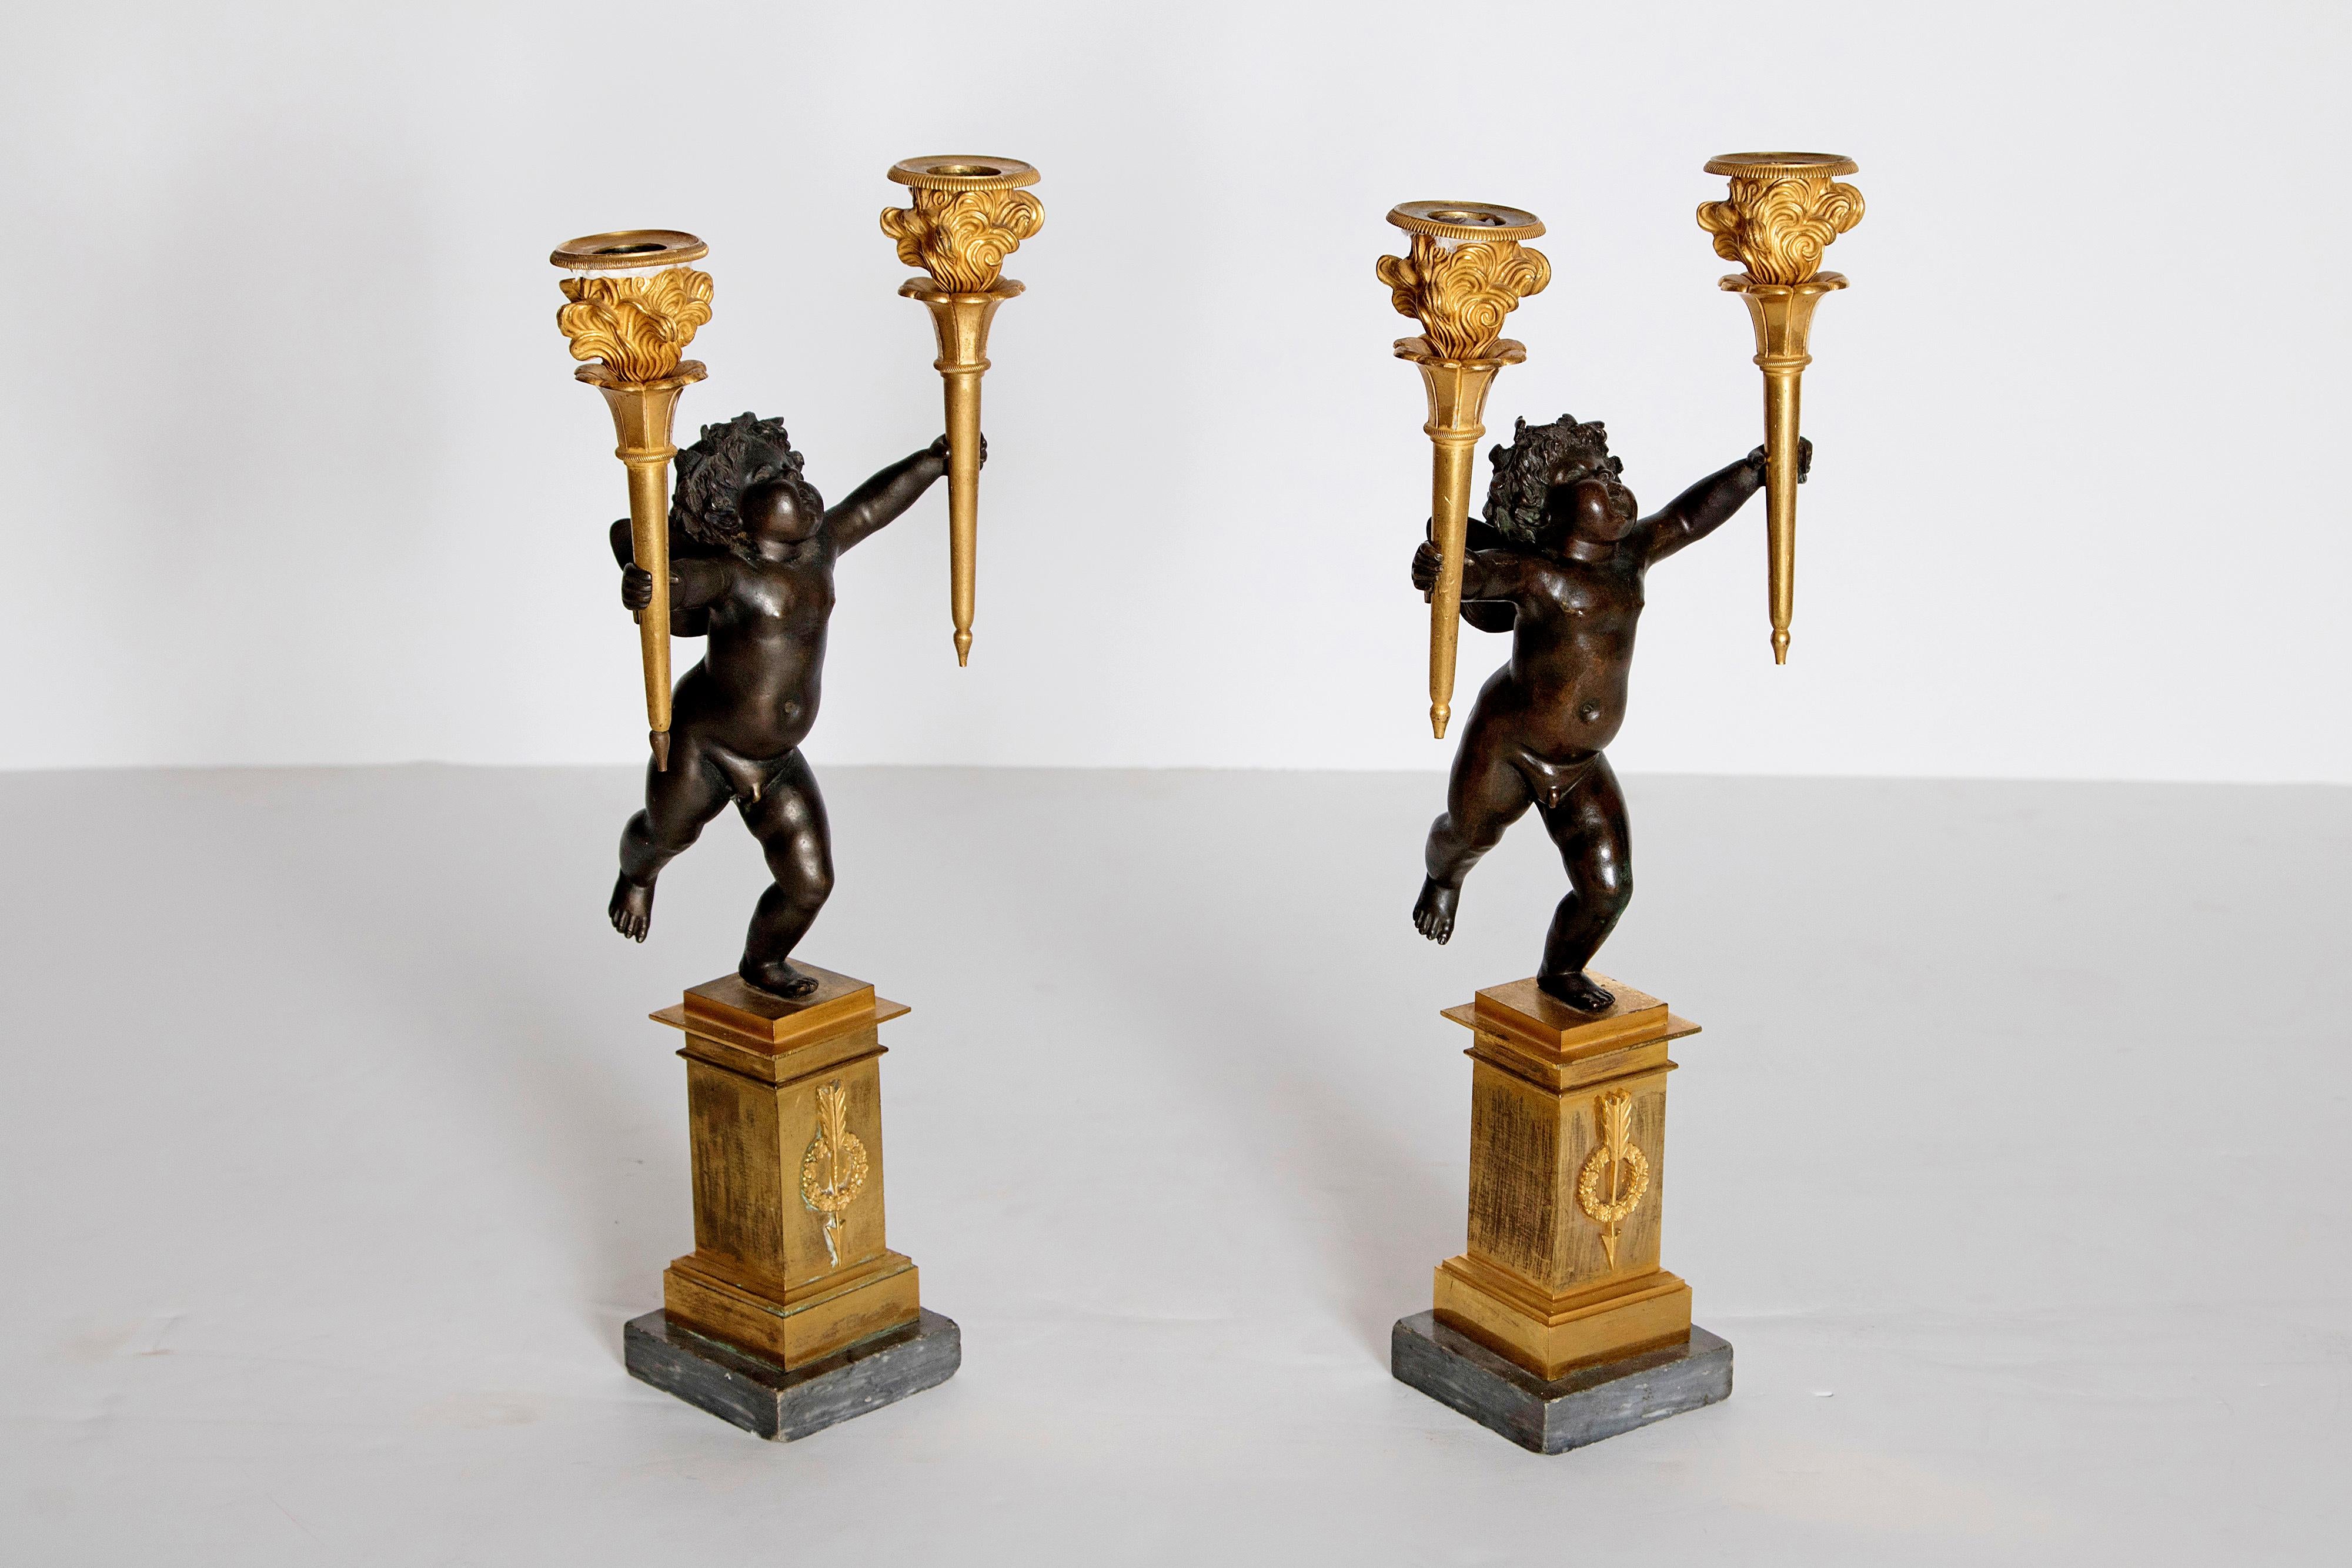 Pair of French Charles X Patinated Bronze and Gilt Figurative Candelabras In Good Condition For Sale In Dallas, TX